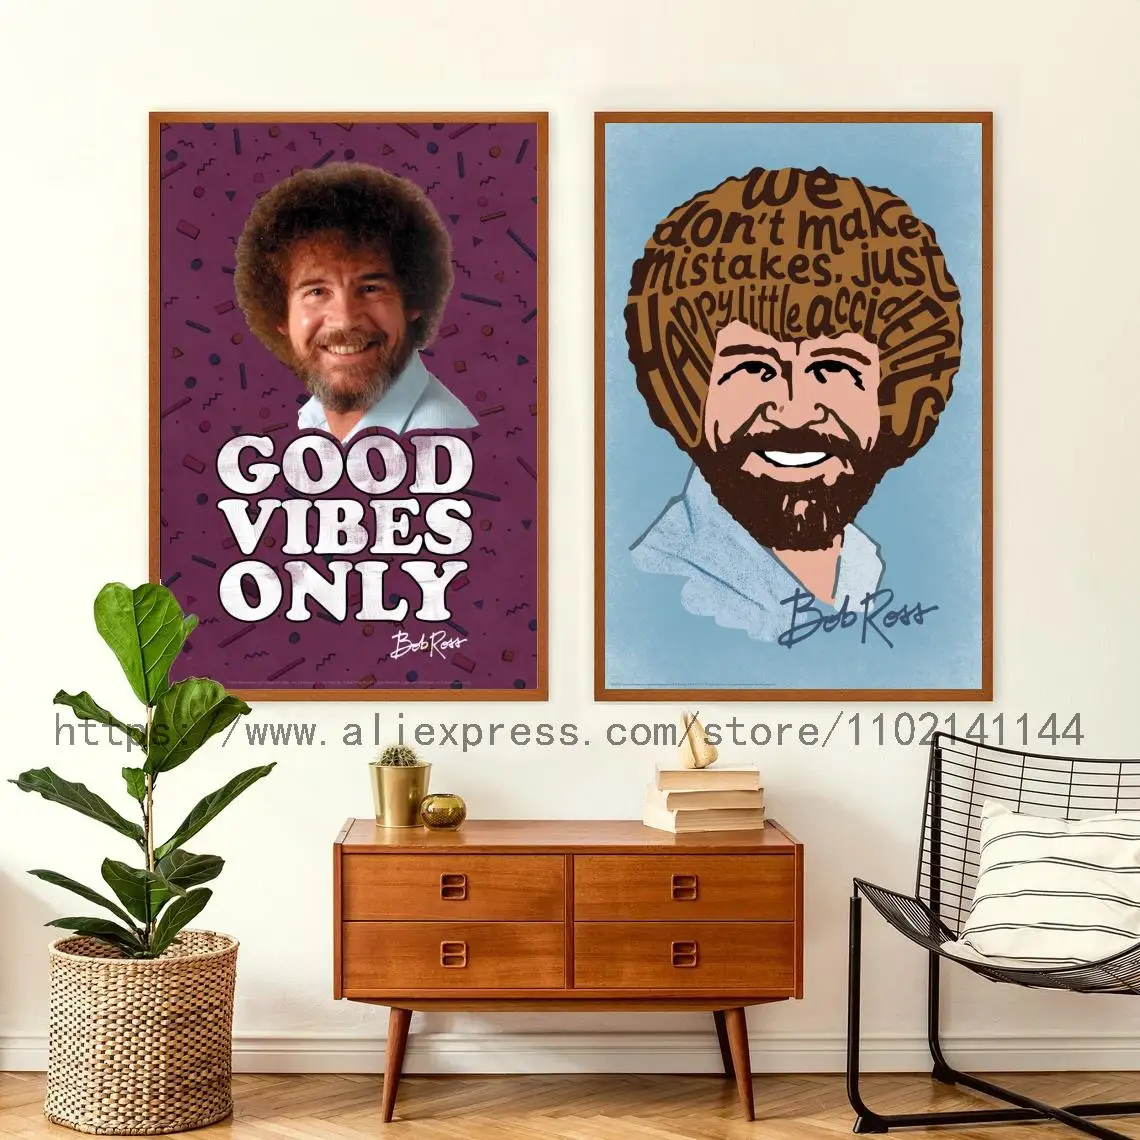 

Bob Ross Good Vibes Only Decoration Art Poster Wall Art Personalized Gift Modern Family bedroom Decor Canvas Posters